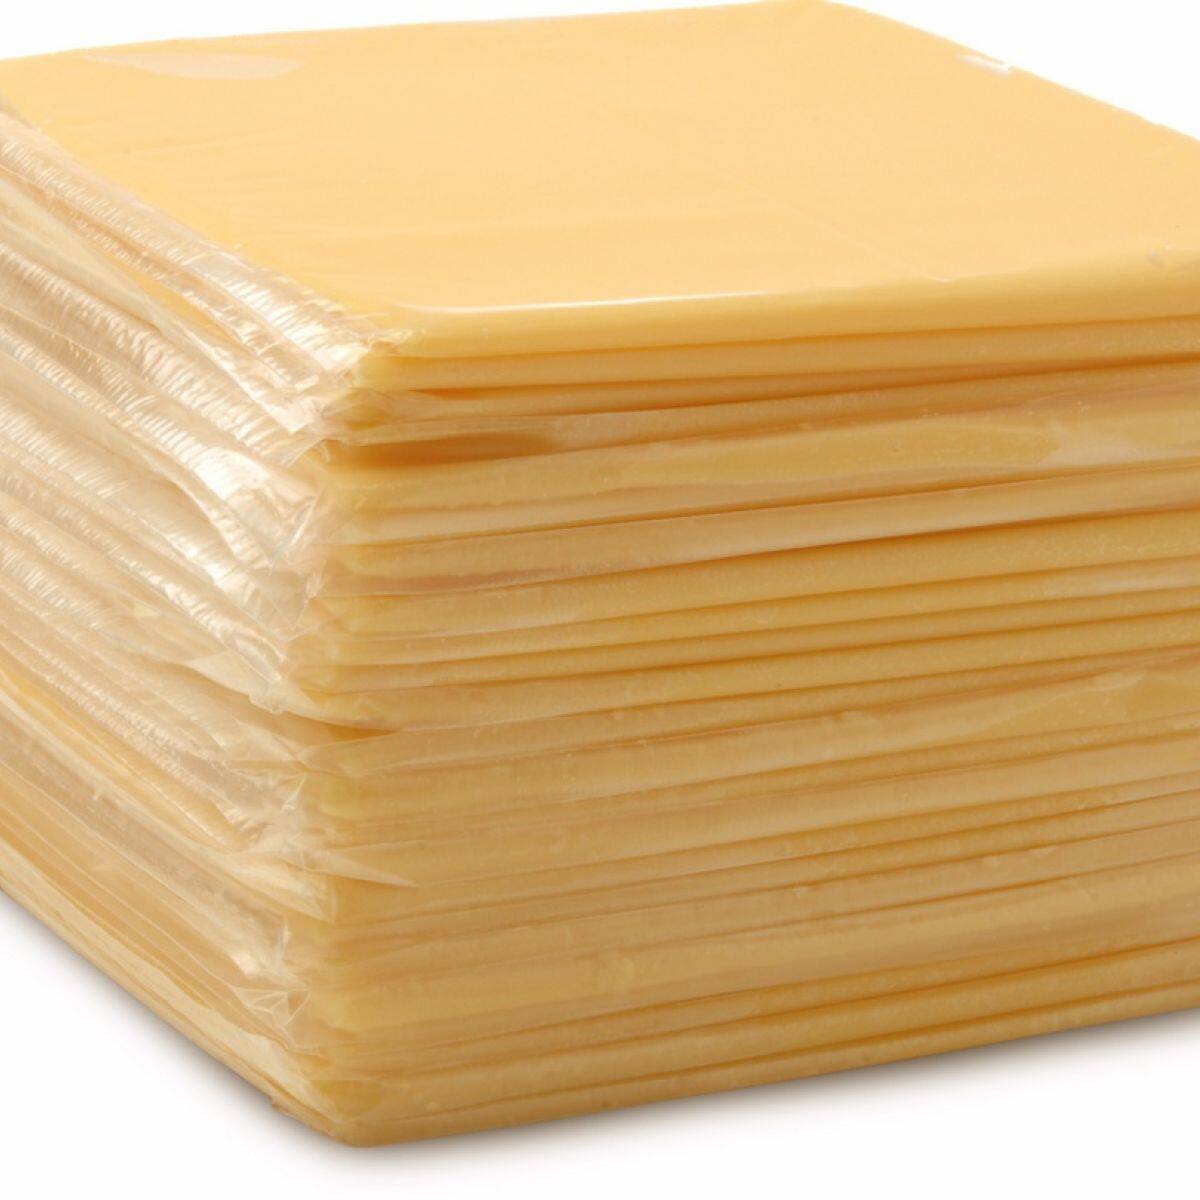 [SALE] CHEESE Emborg Cheddar Cheese Slice (10slices - 200g) RATATOO MARKET